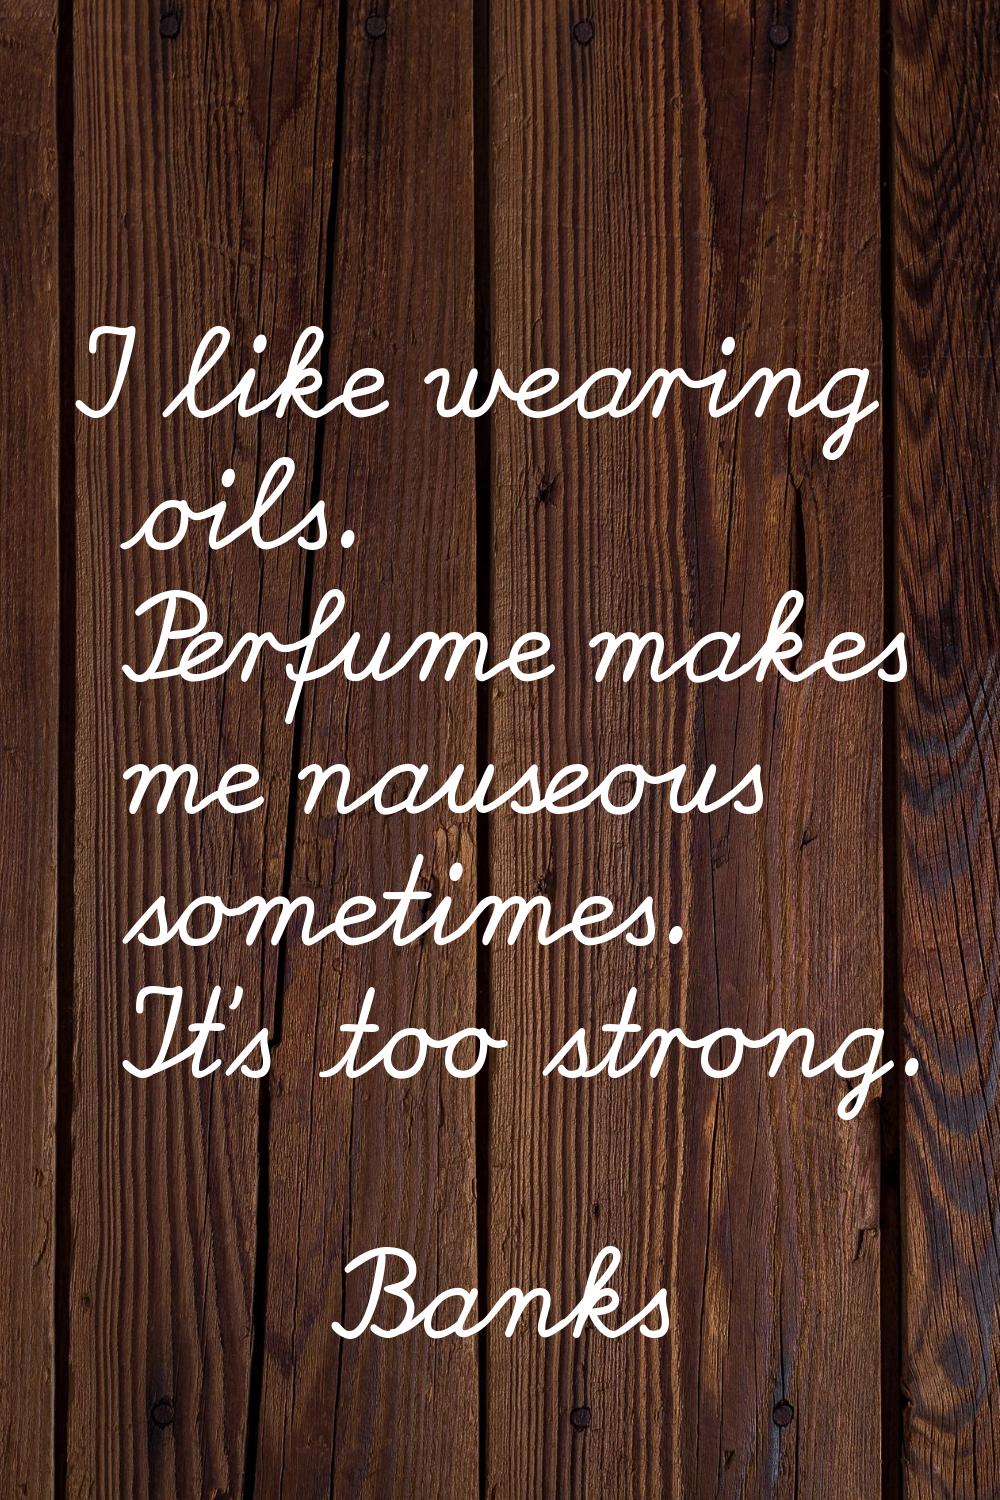 I like wearing oils. Perfume makes me nauseous sometimes. It's too strong.